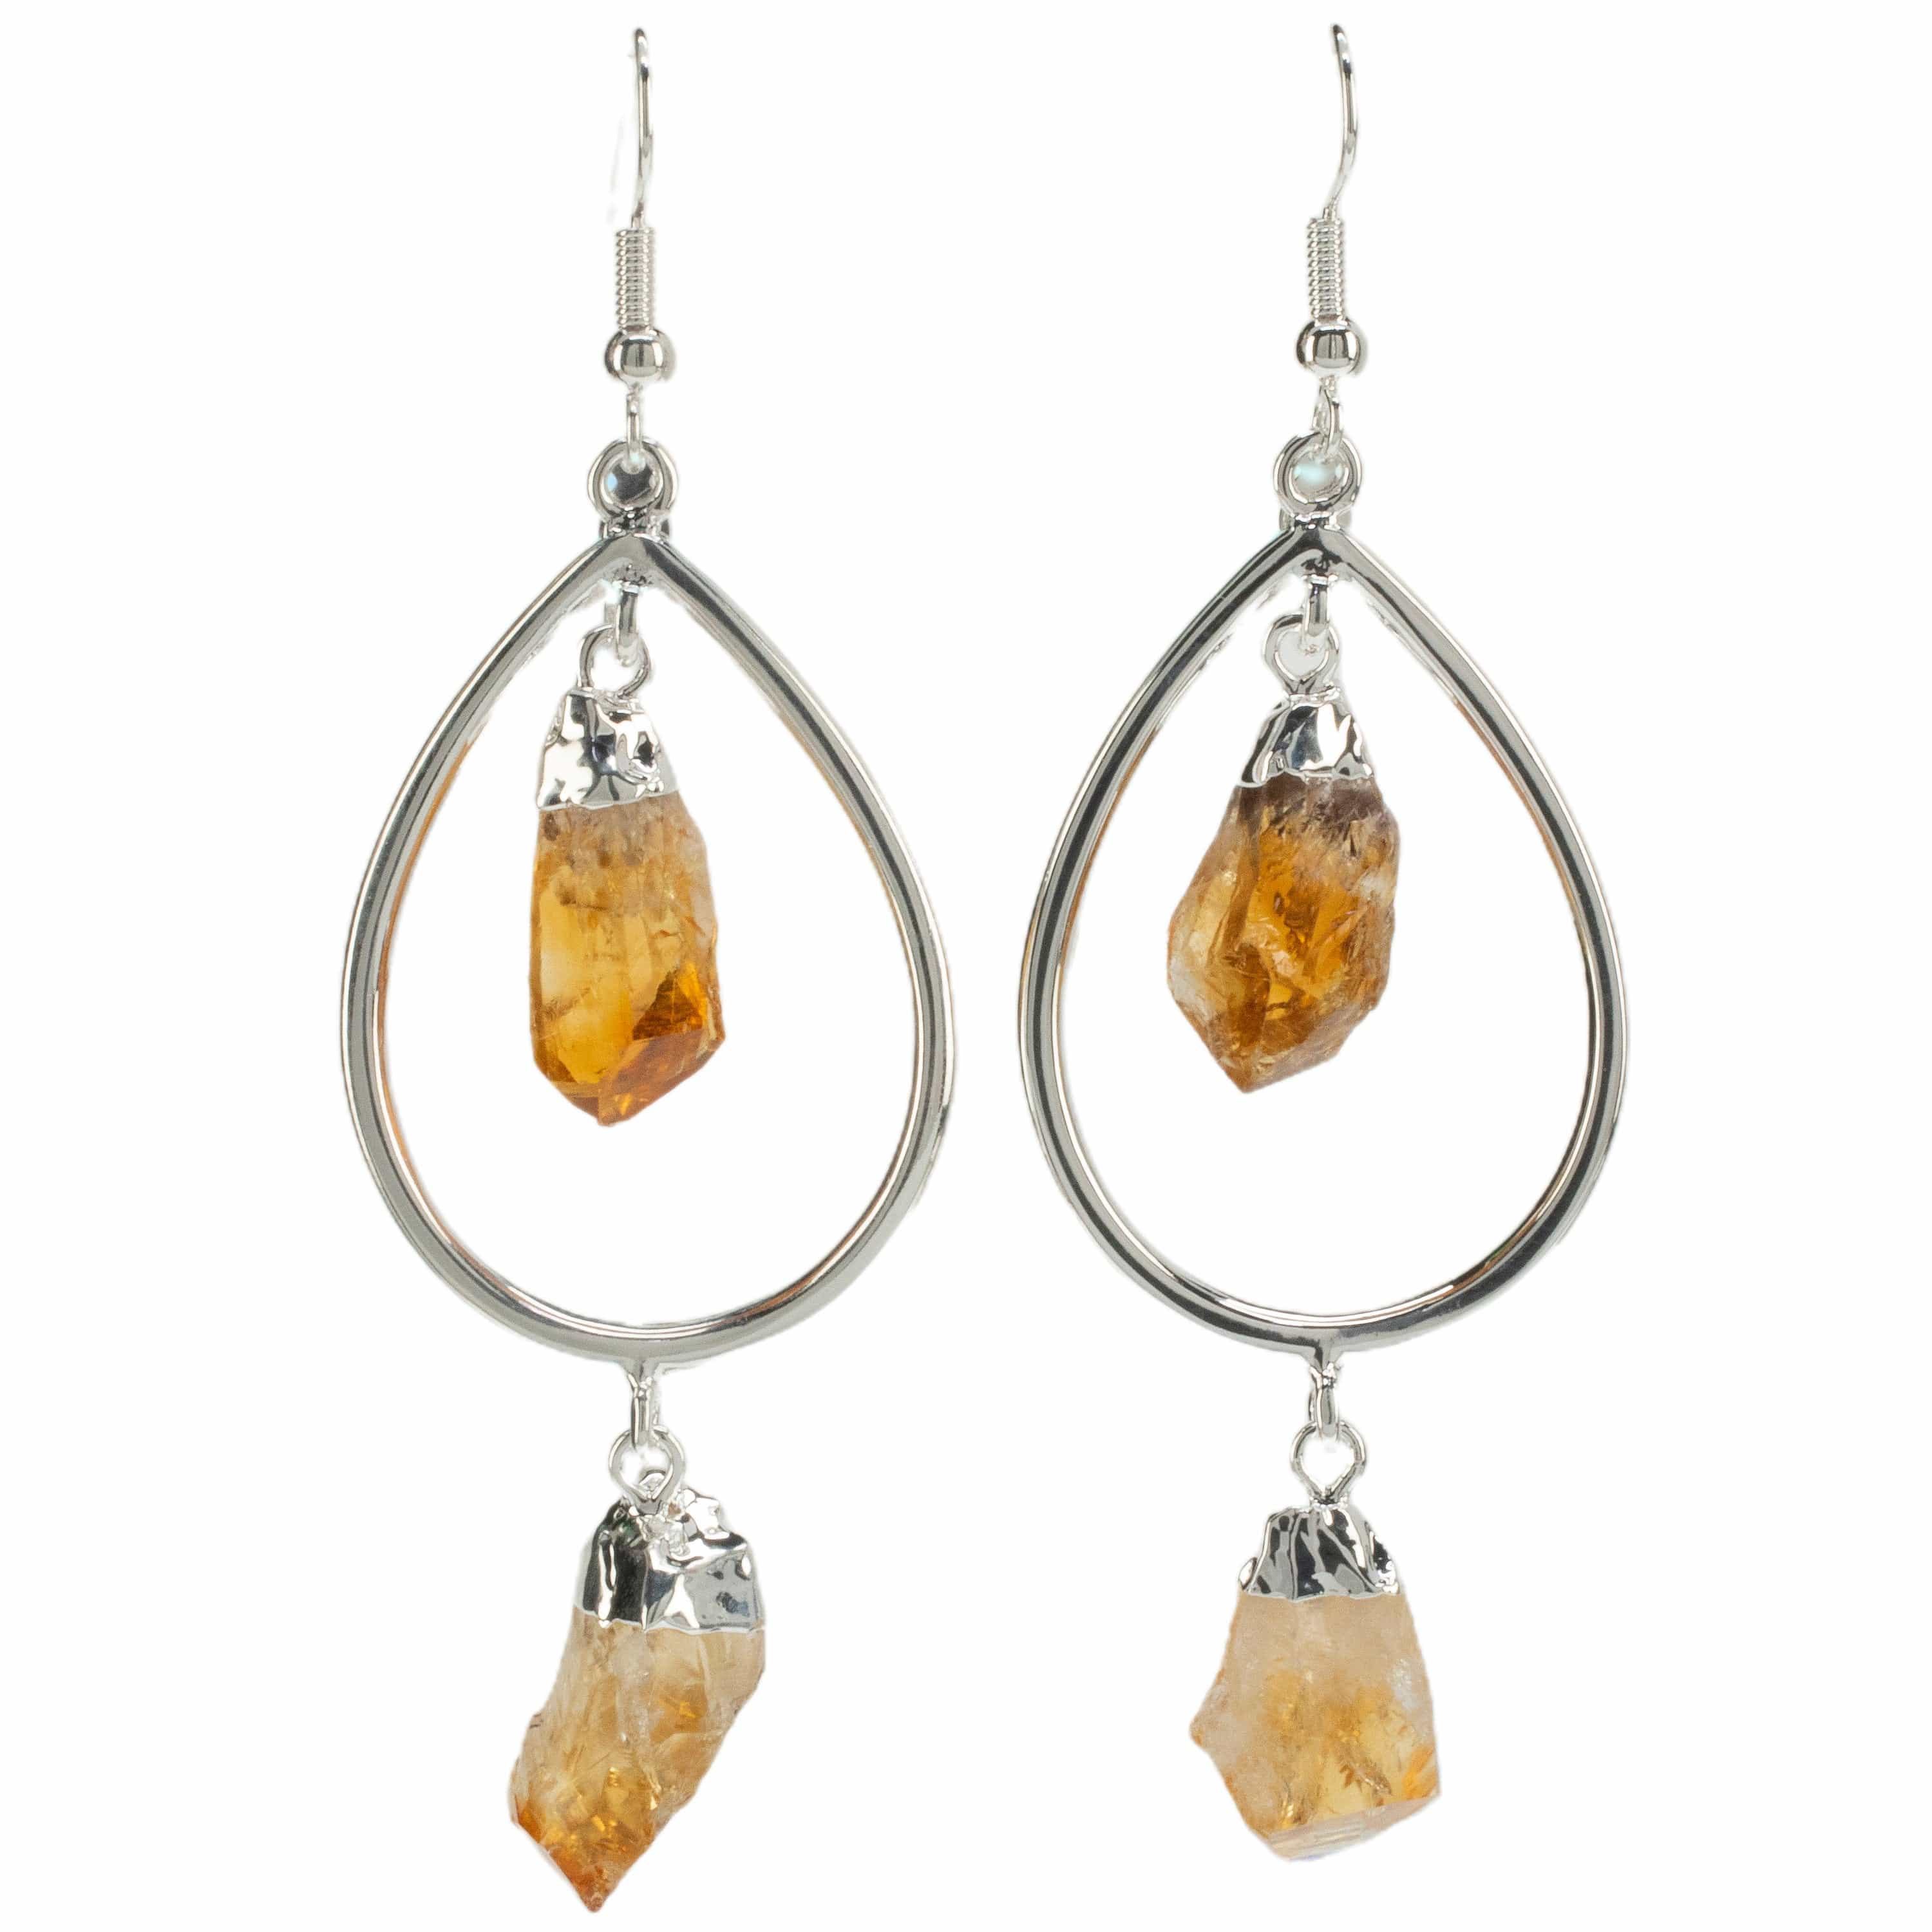 Kalifano Crystal Jewelry Citrine Crystal Drop Earrings with French Hook CJE-1548-CT